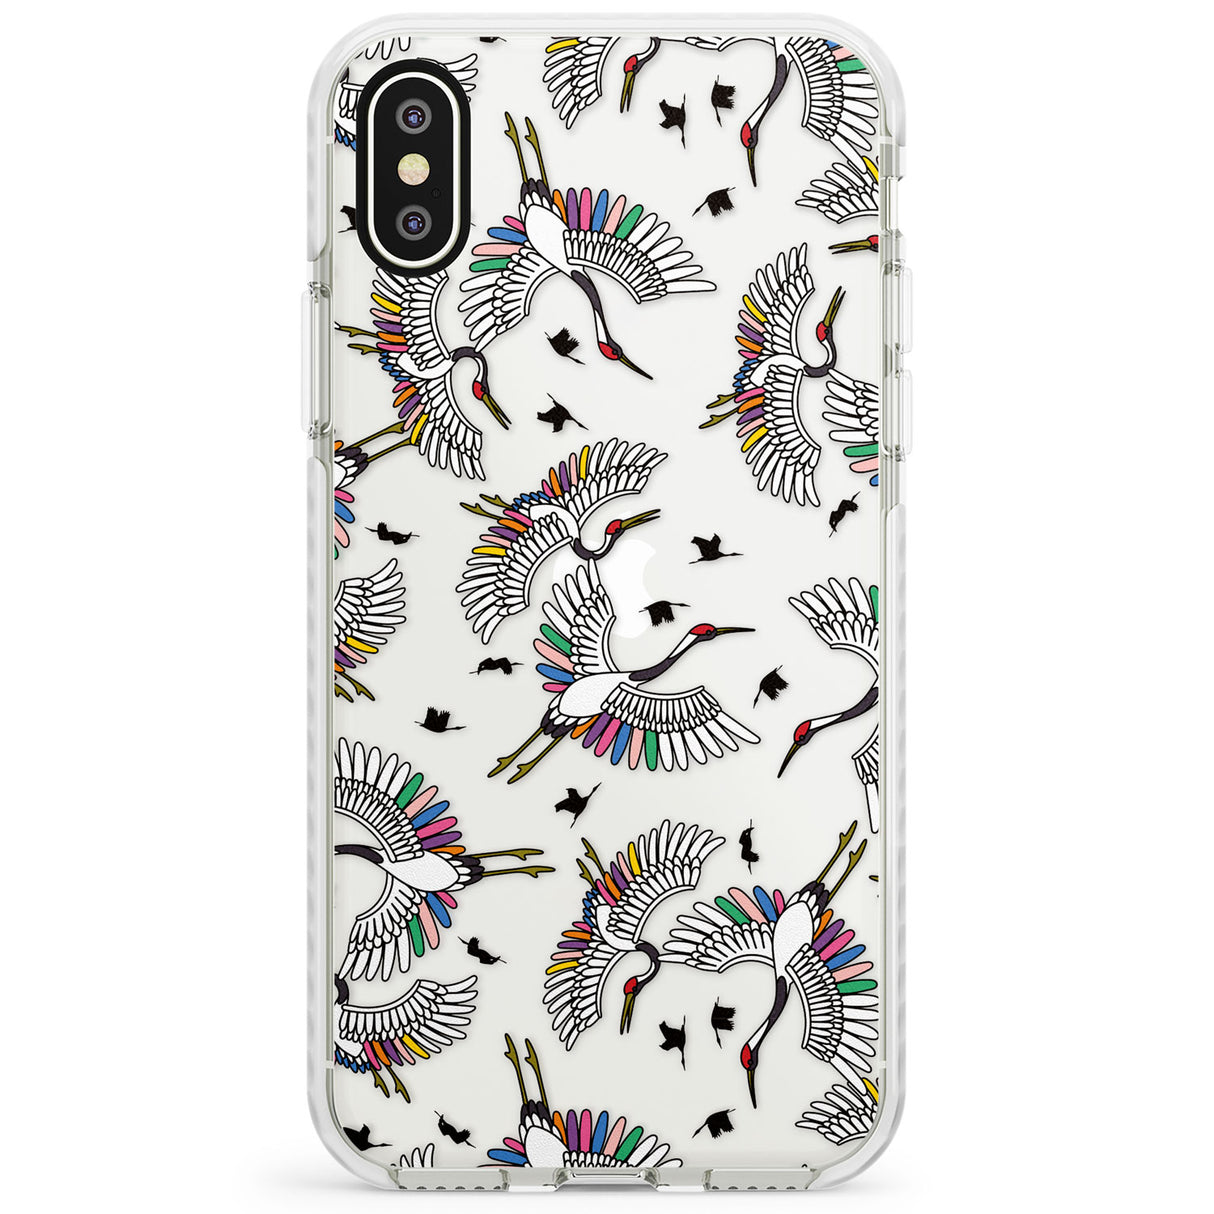 Colourful Crane Pattern Impact Phone Case for iPhone X XS Max XR